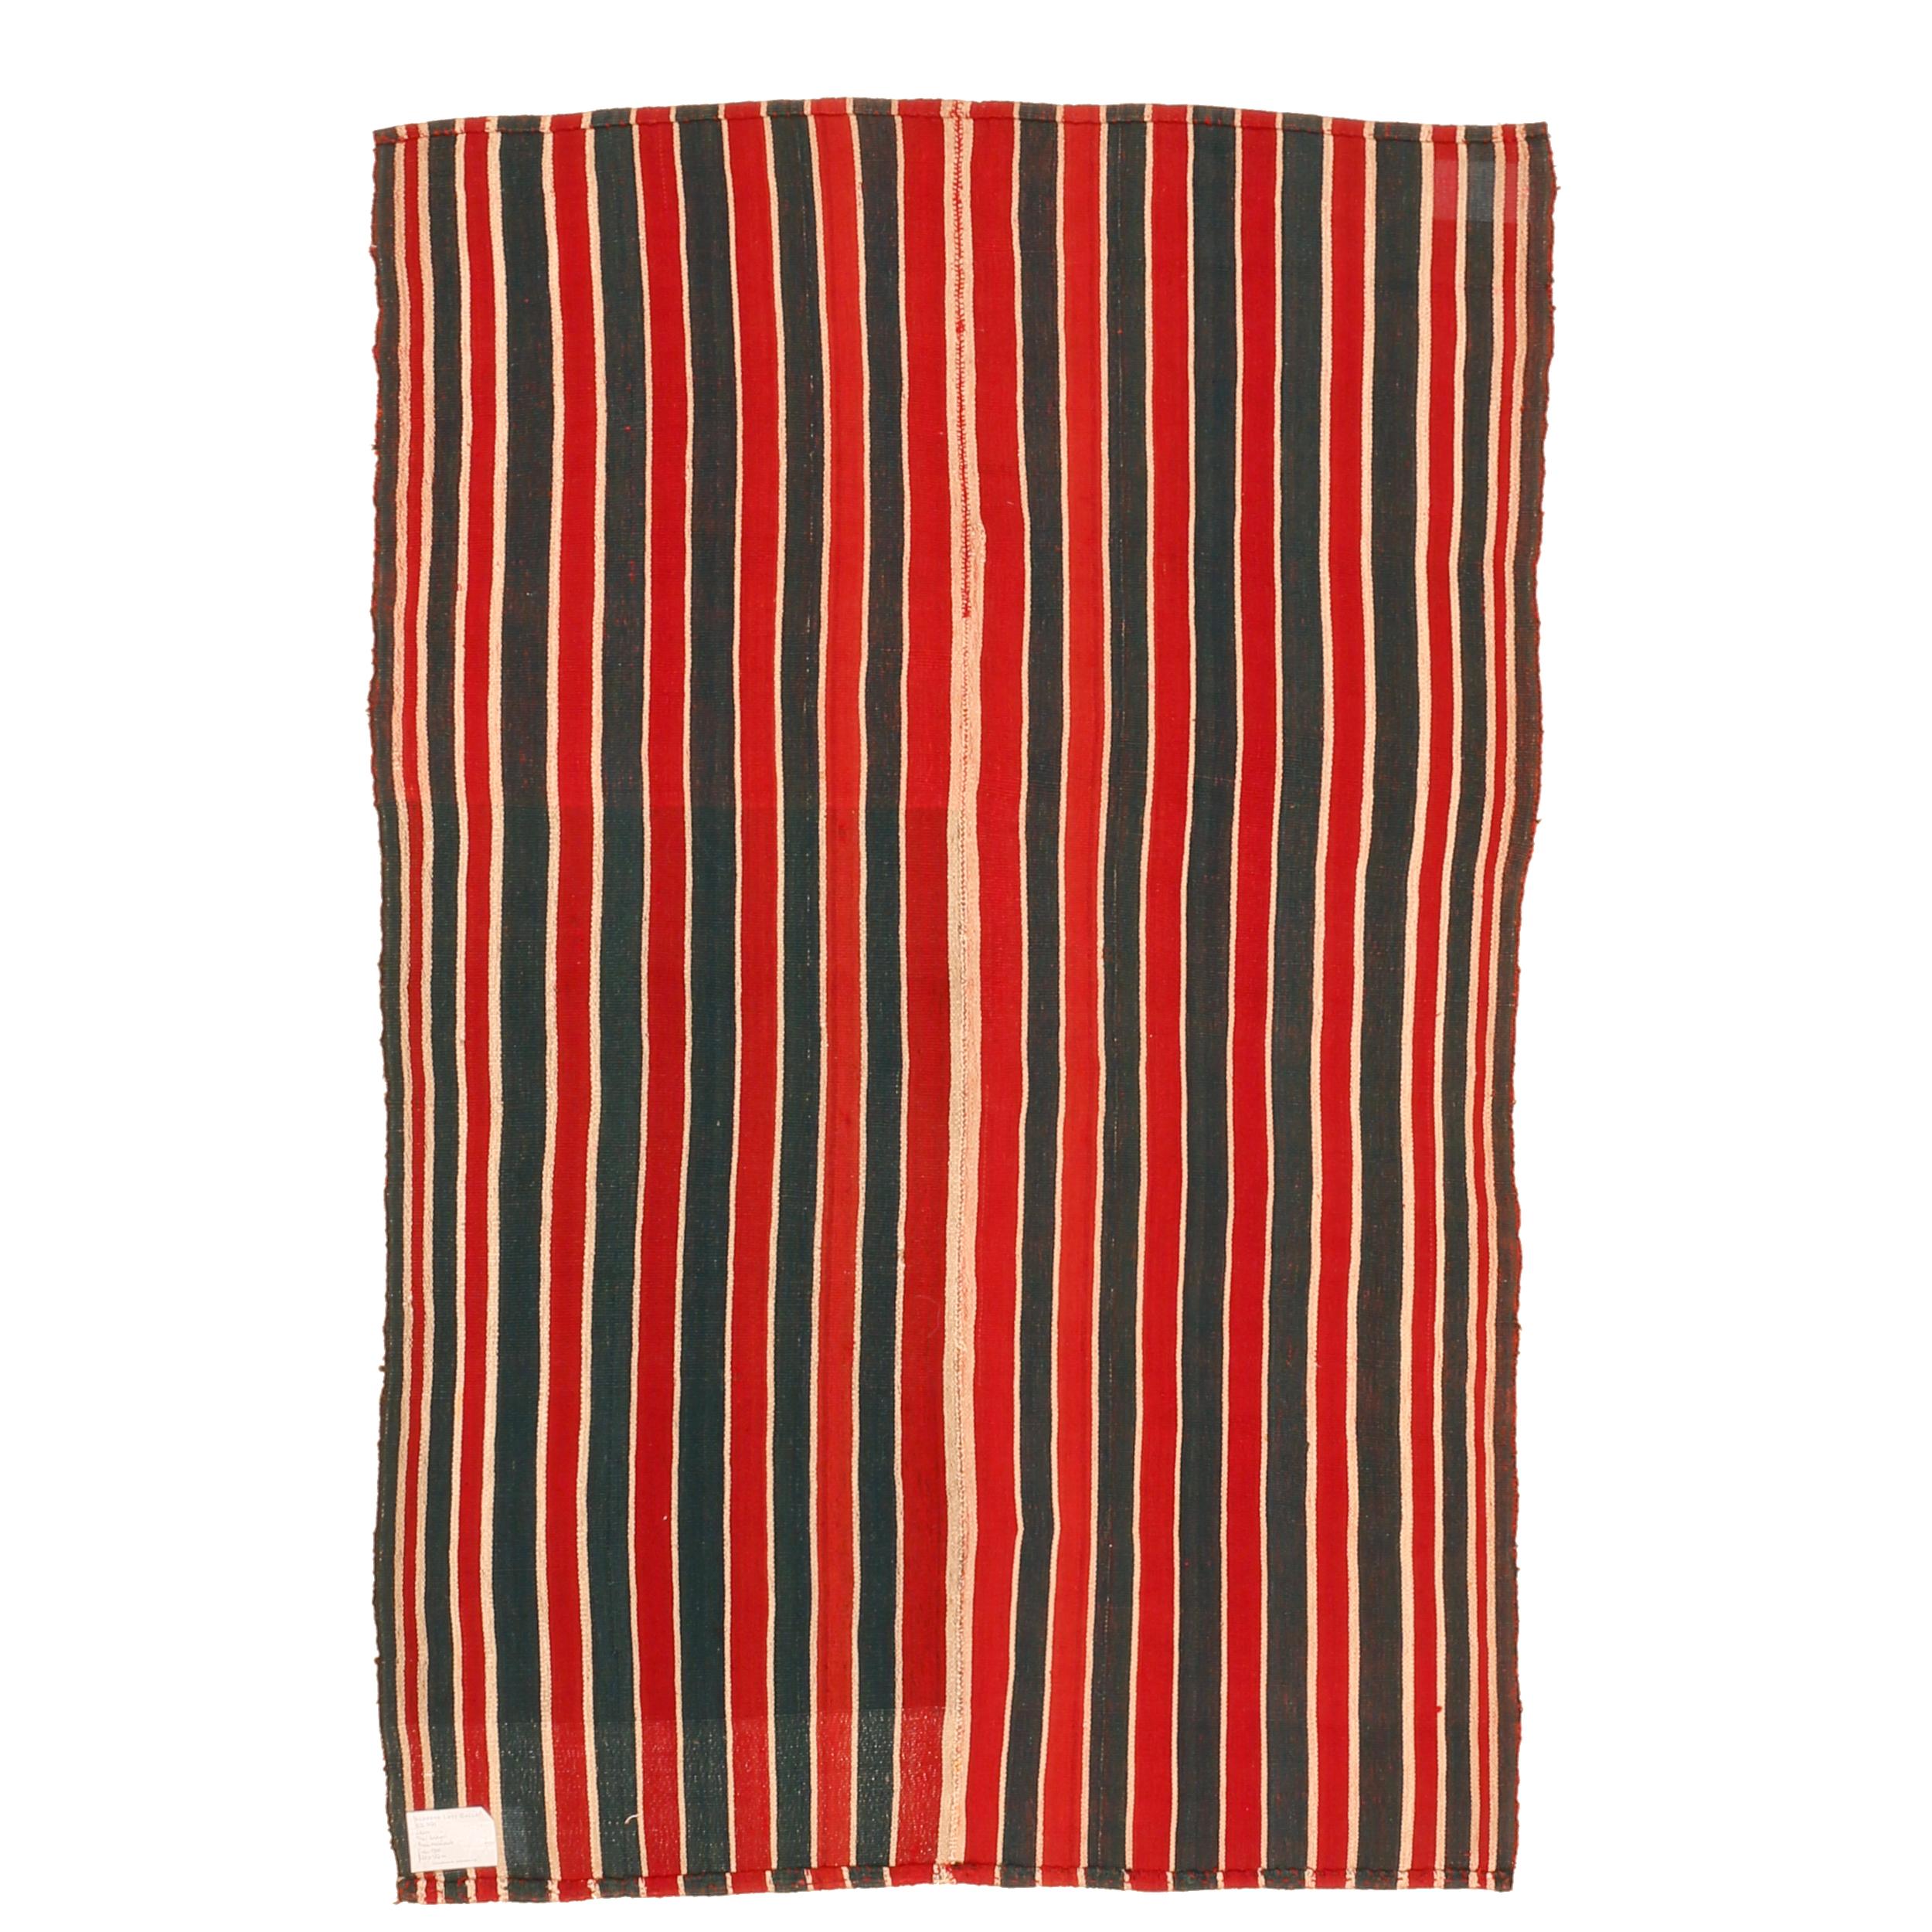 A very graphic tribal Kilim composed of two joined panels each containing a sequence of green and red vertical stripes of various widths, each framed by a narrow ivory stripe. The result is a wool flat-weave with a mirror image pattern having a